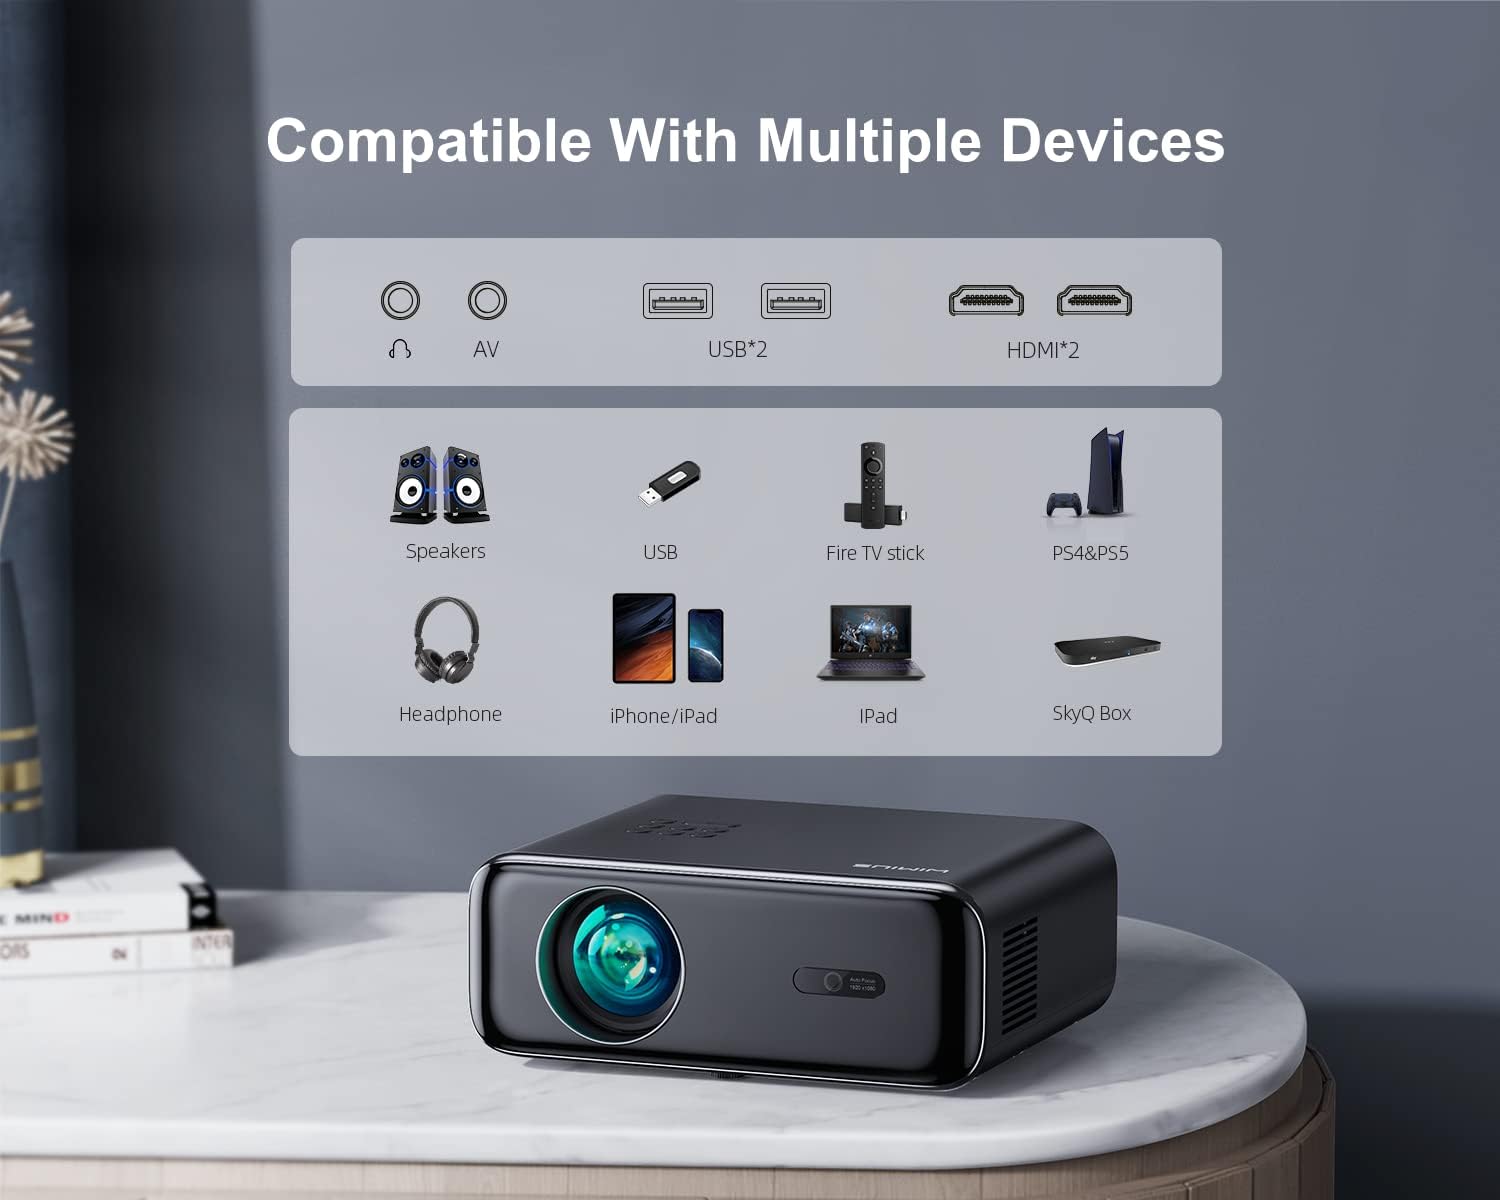 WiMiUS Home Projector P62 – WiMiUS Official